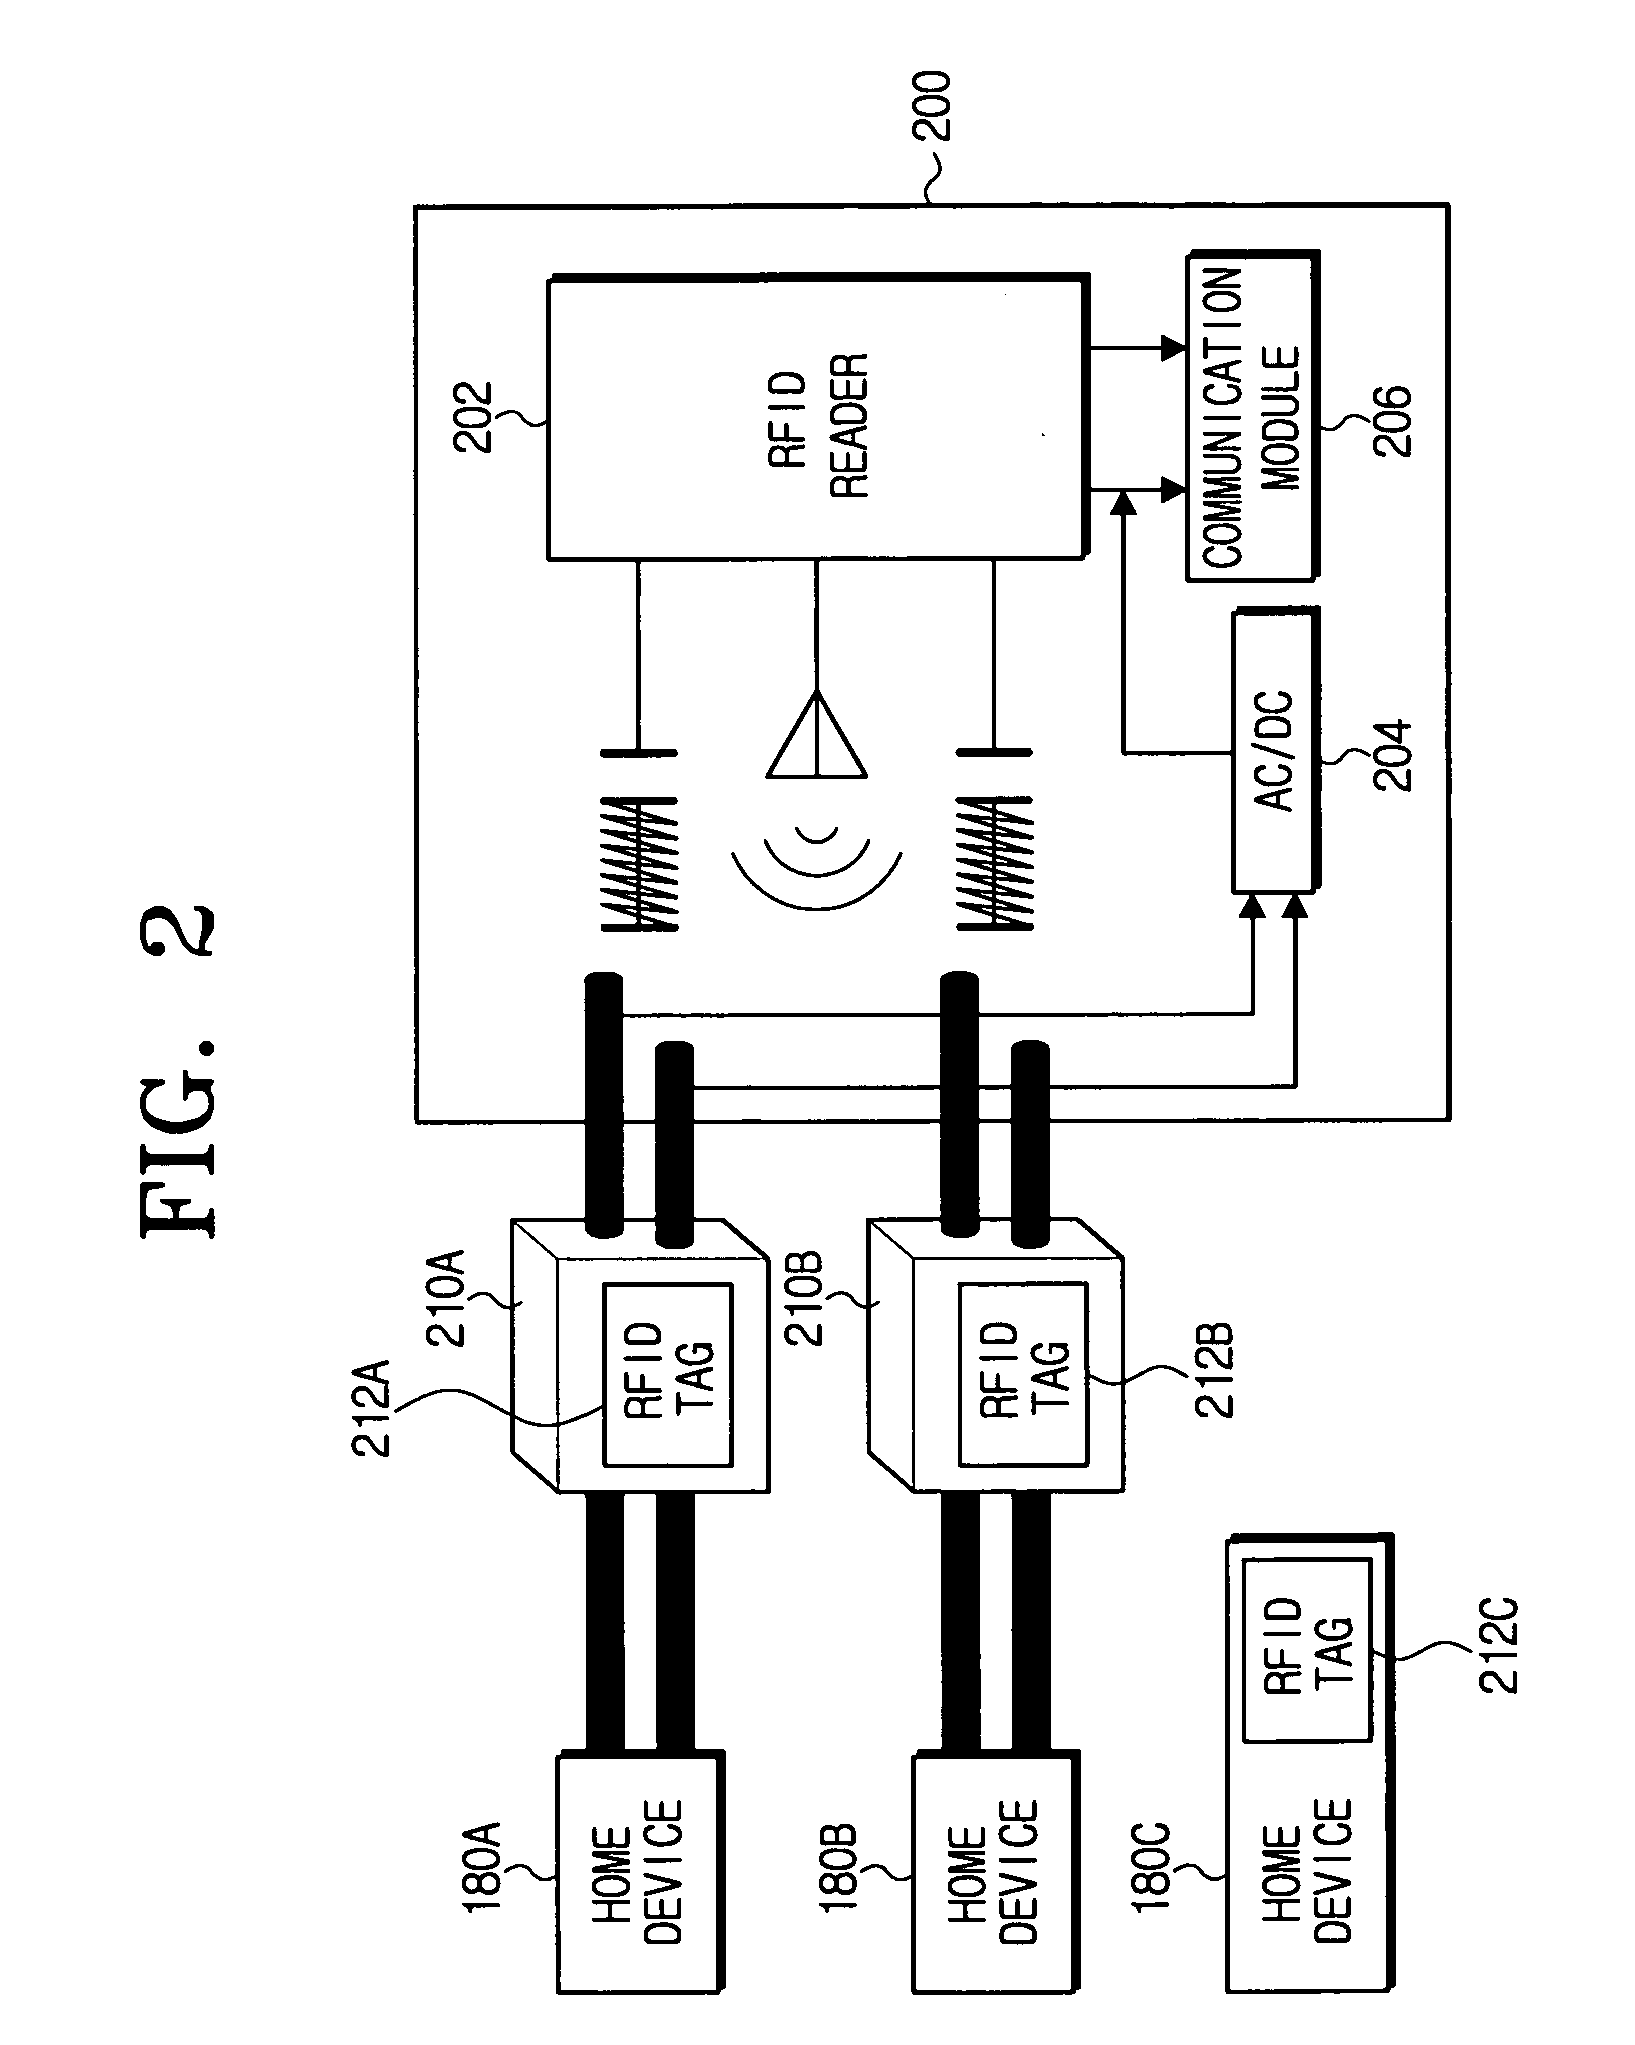 Method and apparatus for recognizing location of a home device using RFID